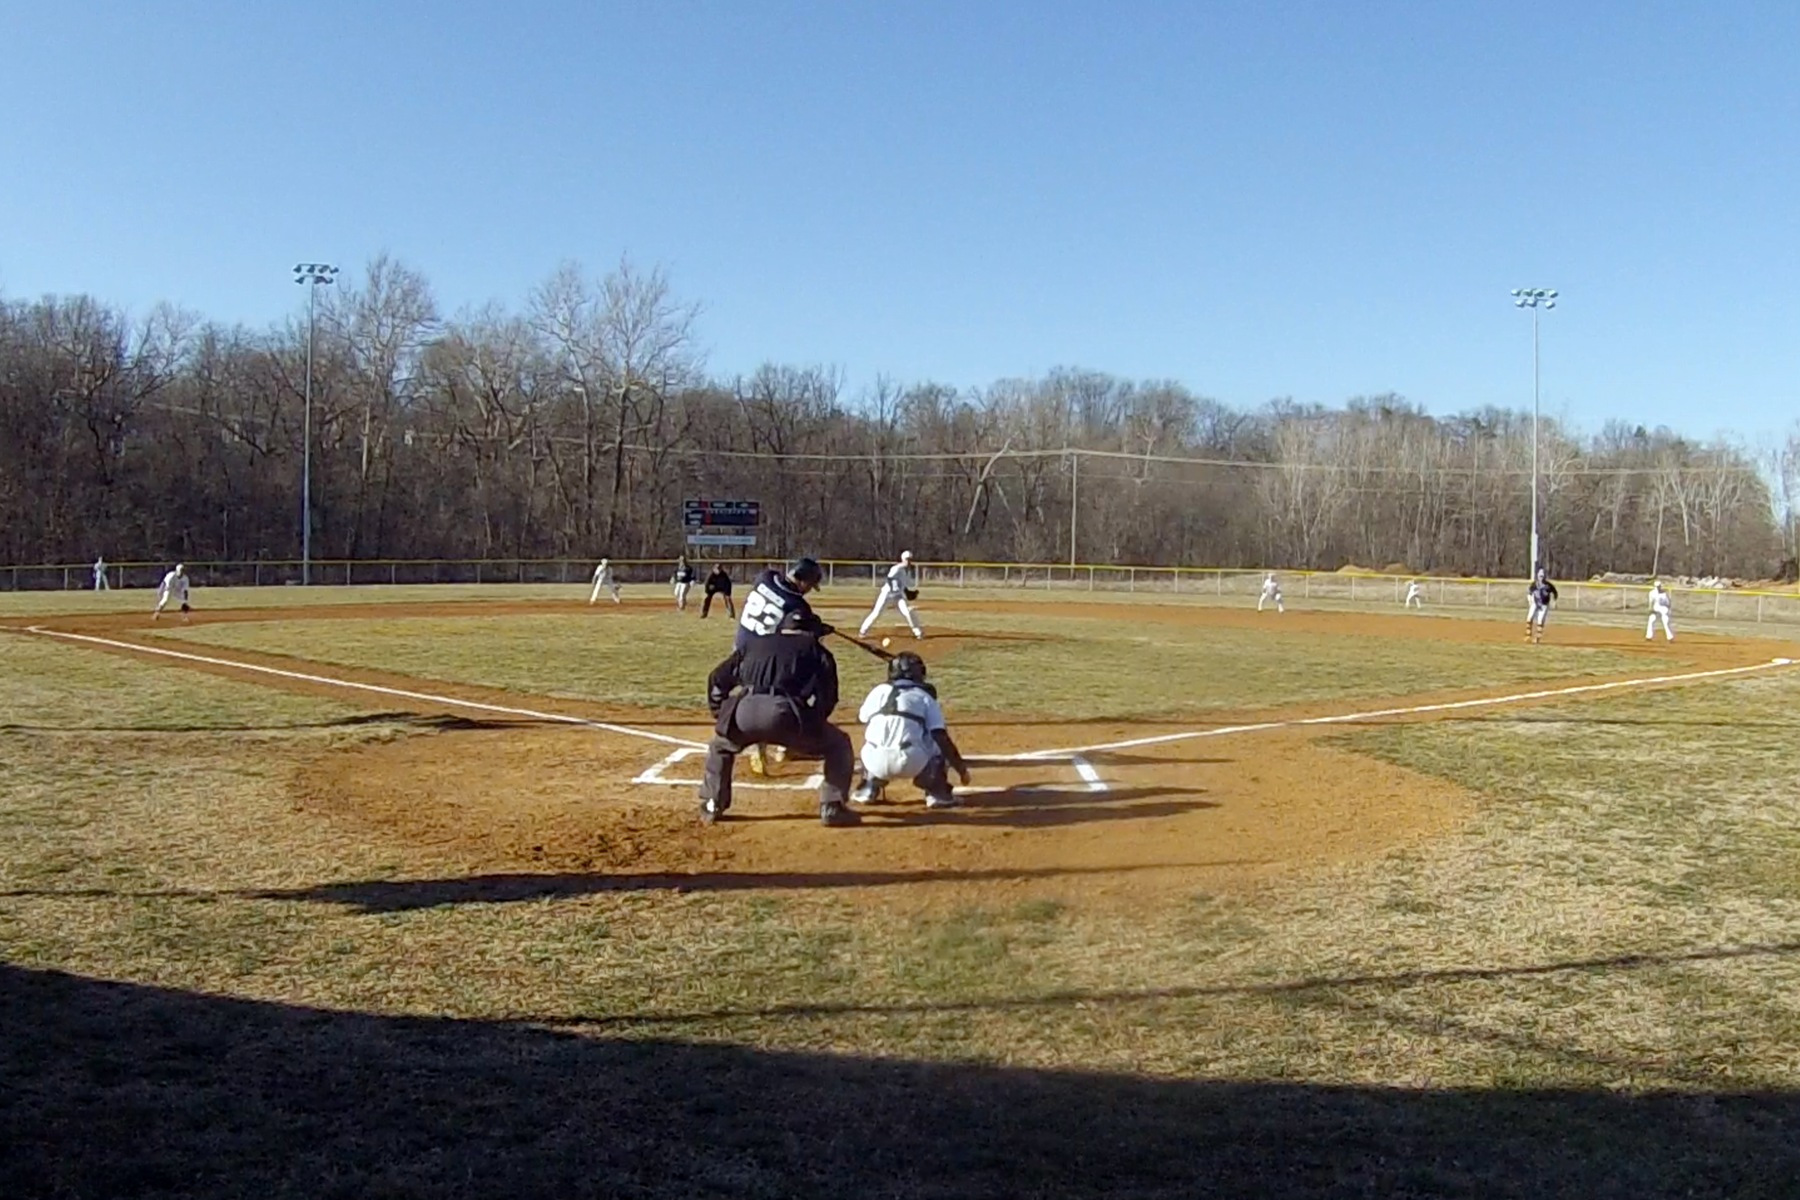 Brad Church connects for a first-inning three-run blast in the first game of the double-header at Christendom.